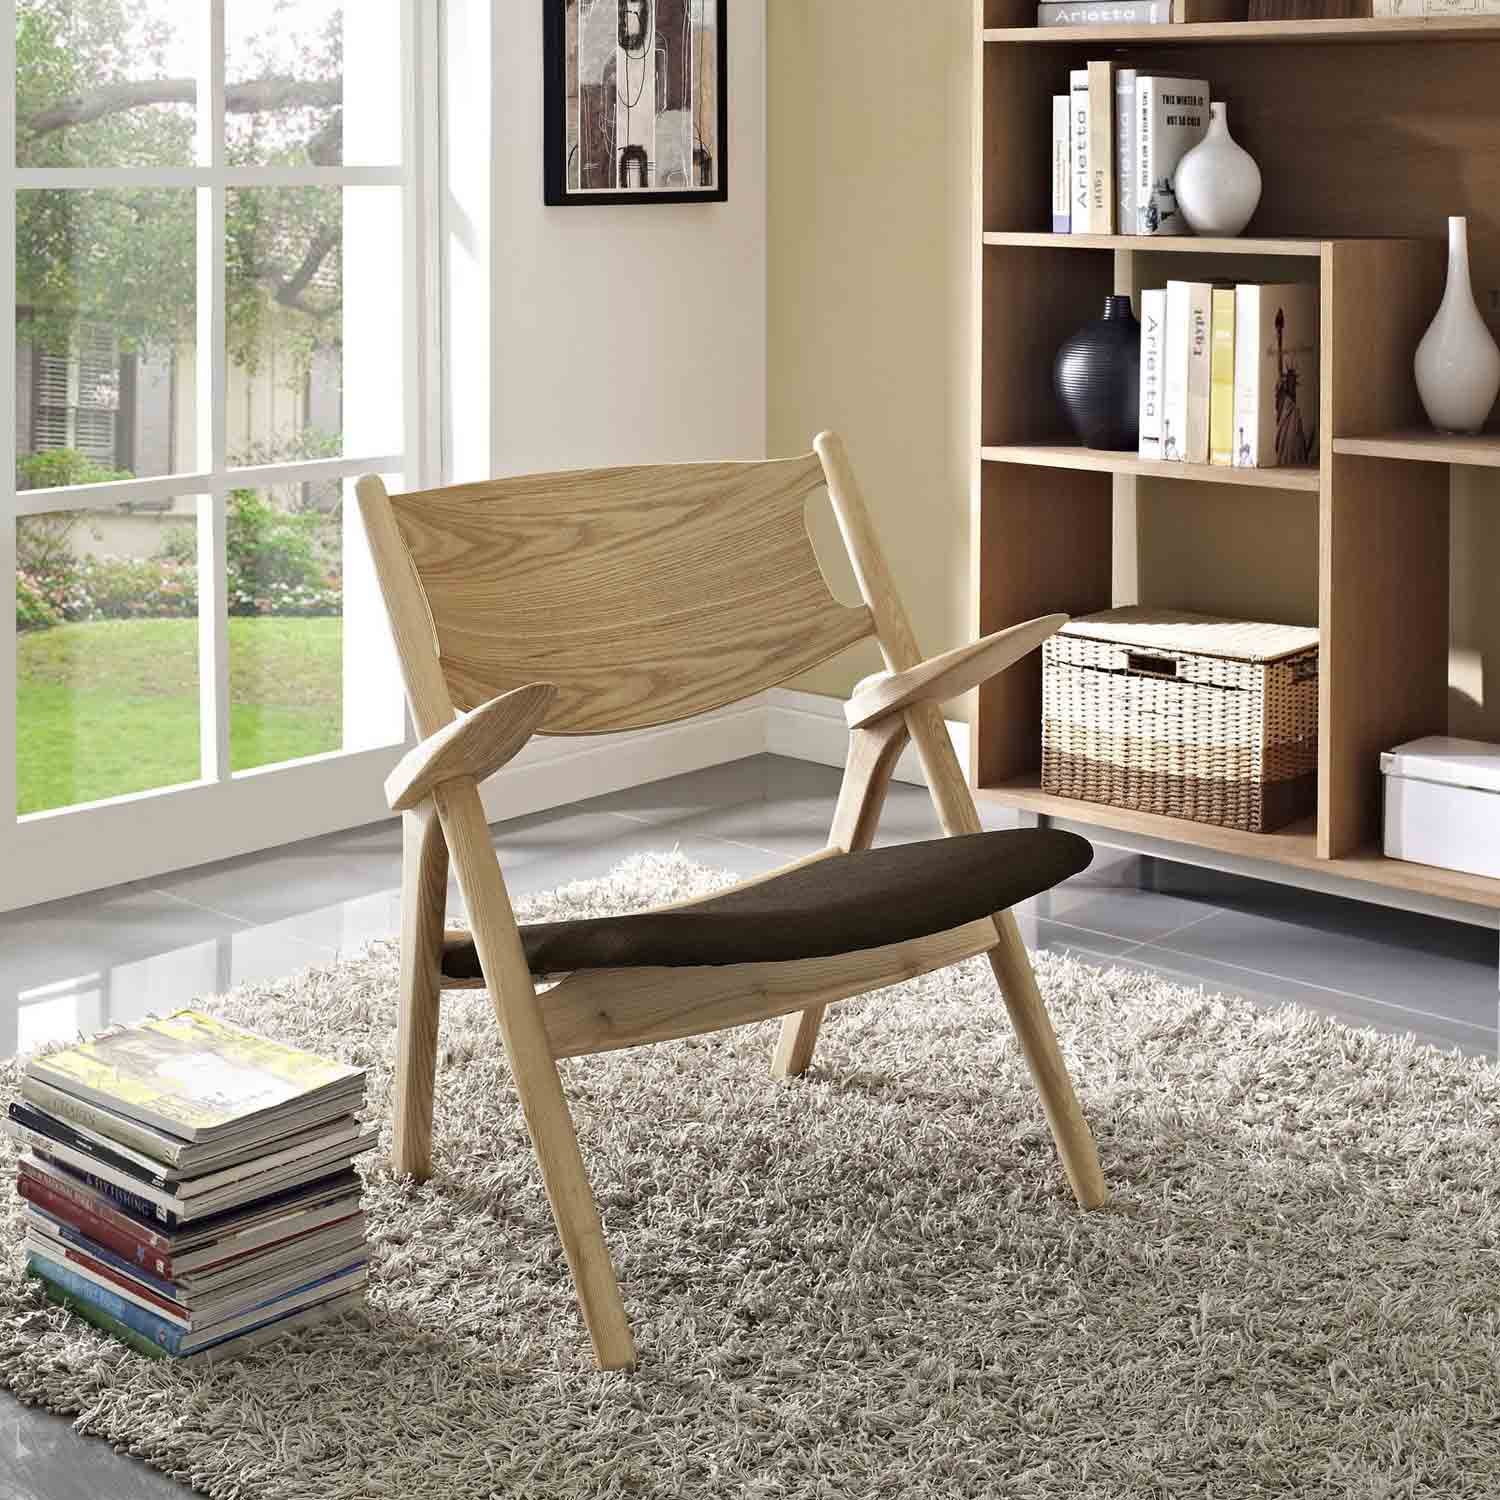 Modway Concise Lounge Chair - Natural Brown